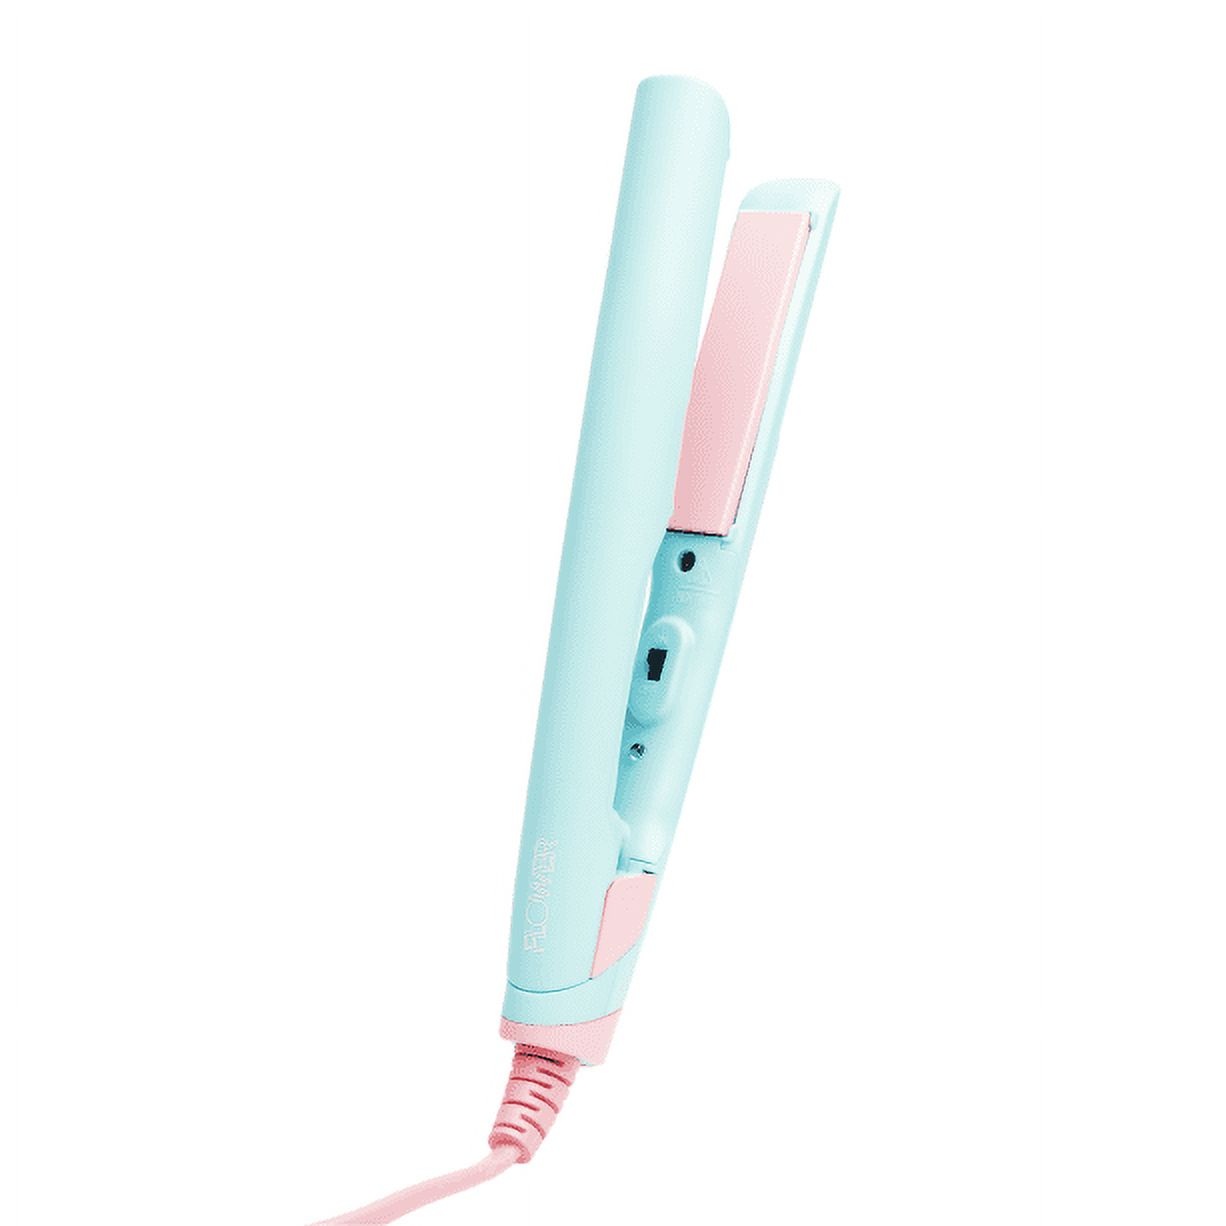 Flower Travel Flat Iron, Compact Mini Straightener with Dual Voltage for Travel - image 1 of 11